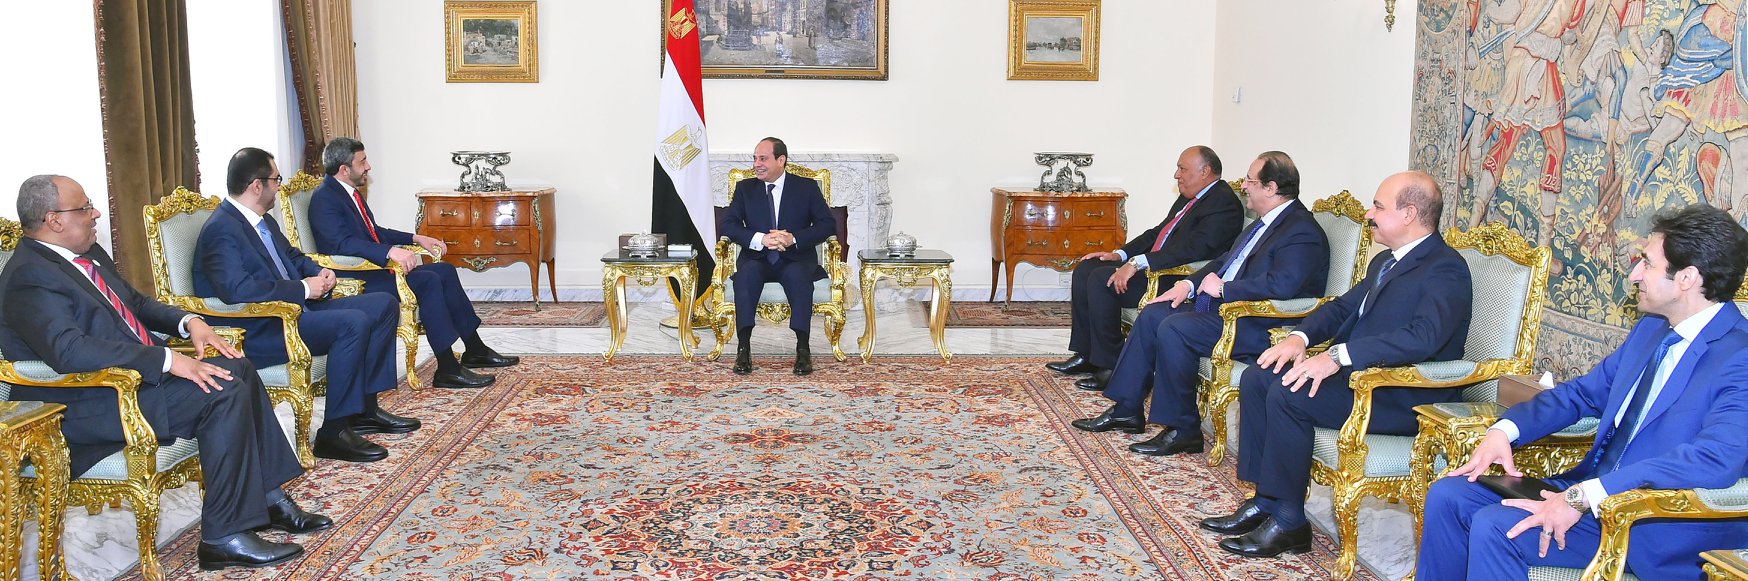 Egyptian President meets with UAE Foreign Minister